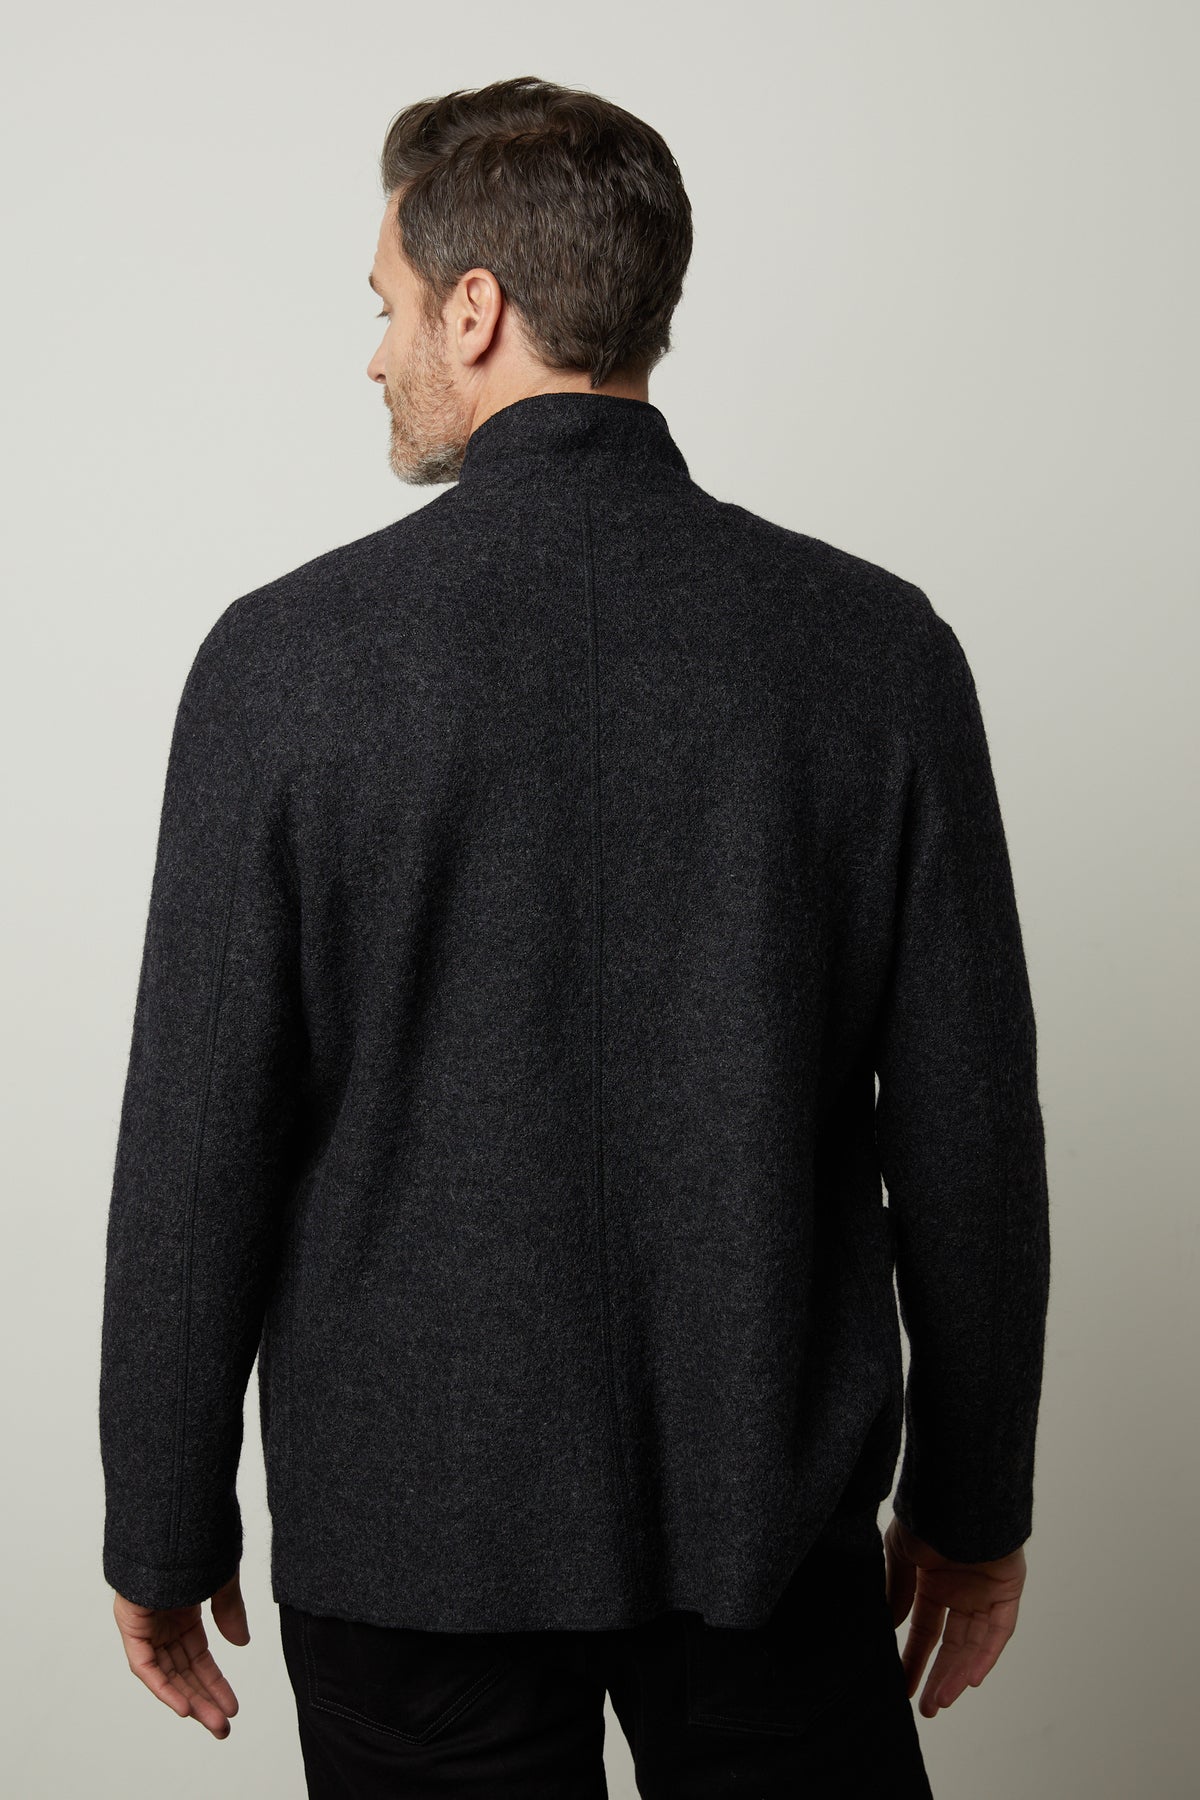   The back view of a man wearing a Velvet by Graham & Spencer BOWEN BOILED WOOL BLEND JACKET. 